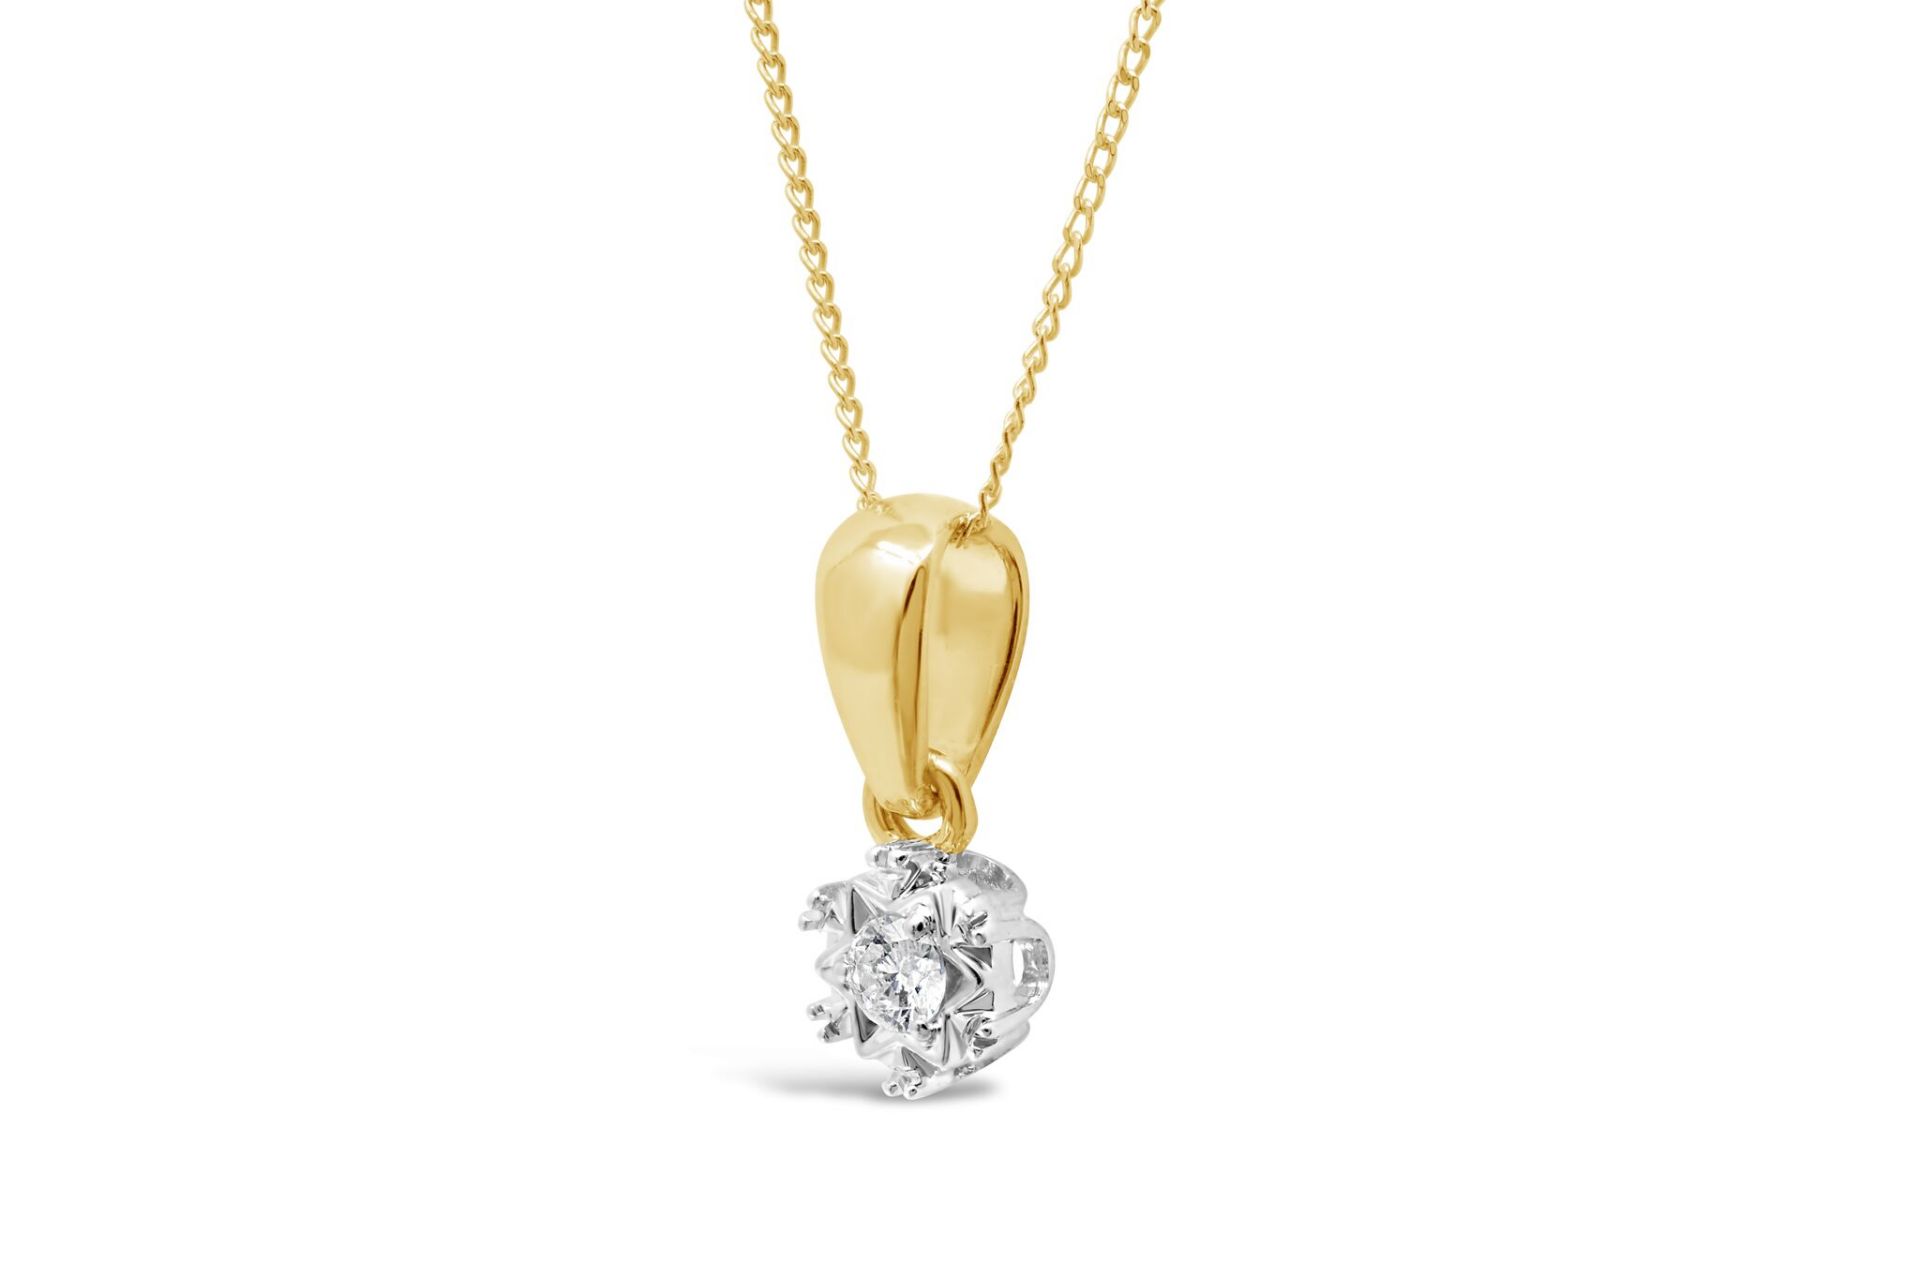 Diamond necklace with detailed setting and a bright diamond - Image 3 of 4